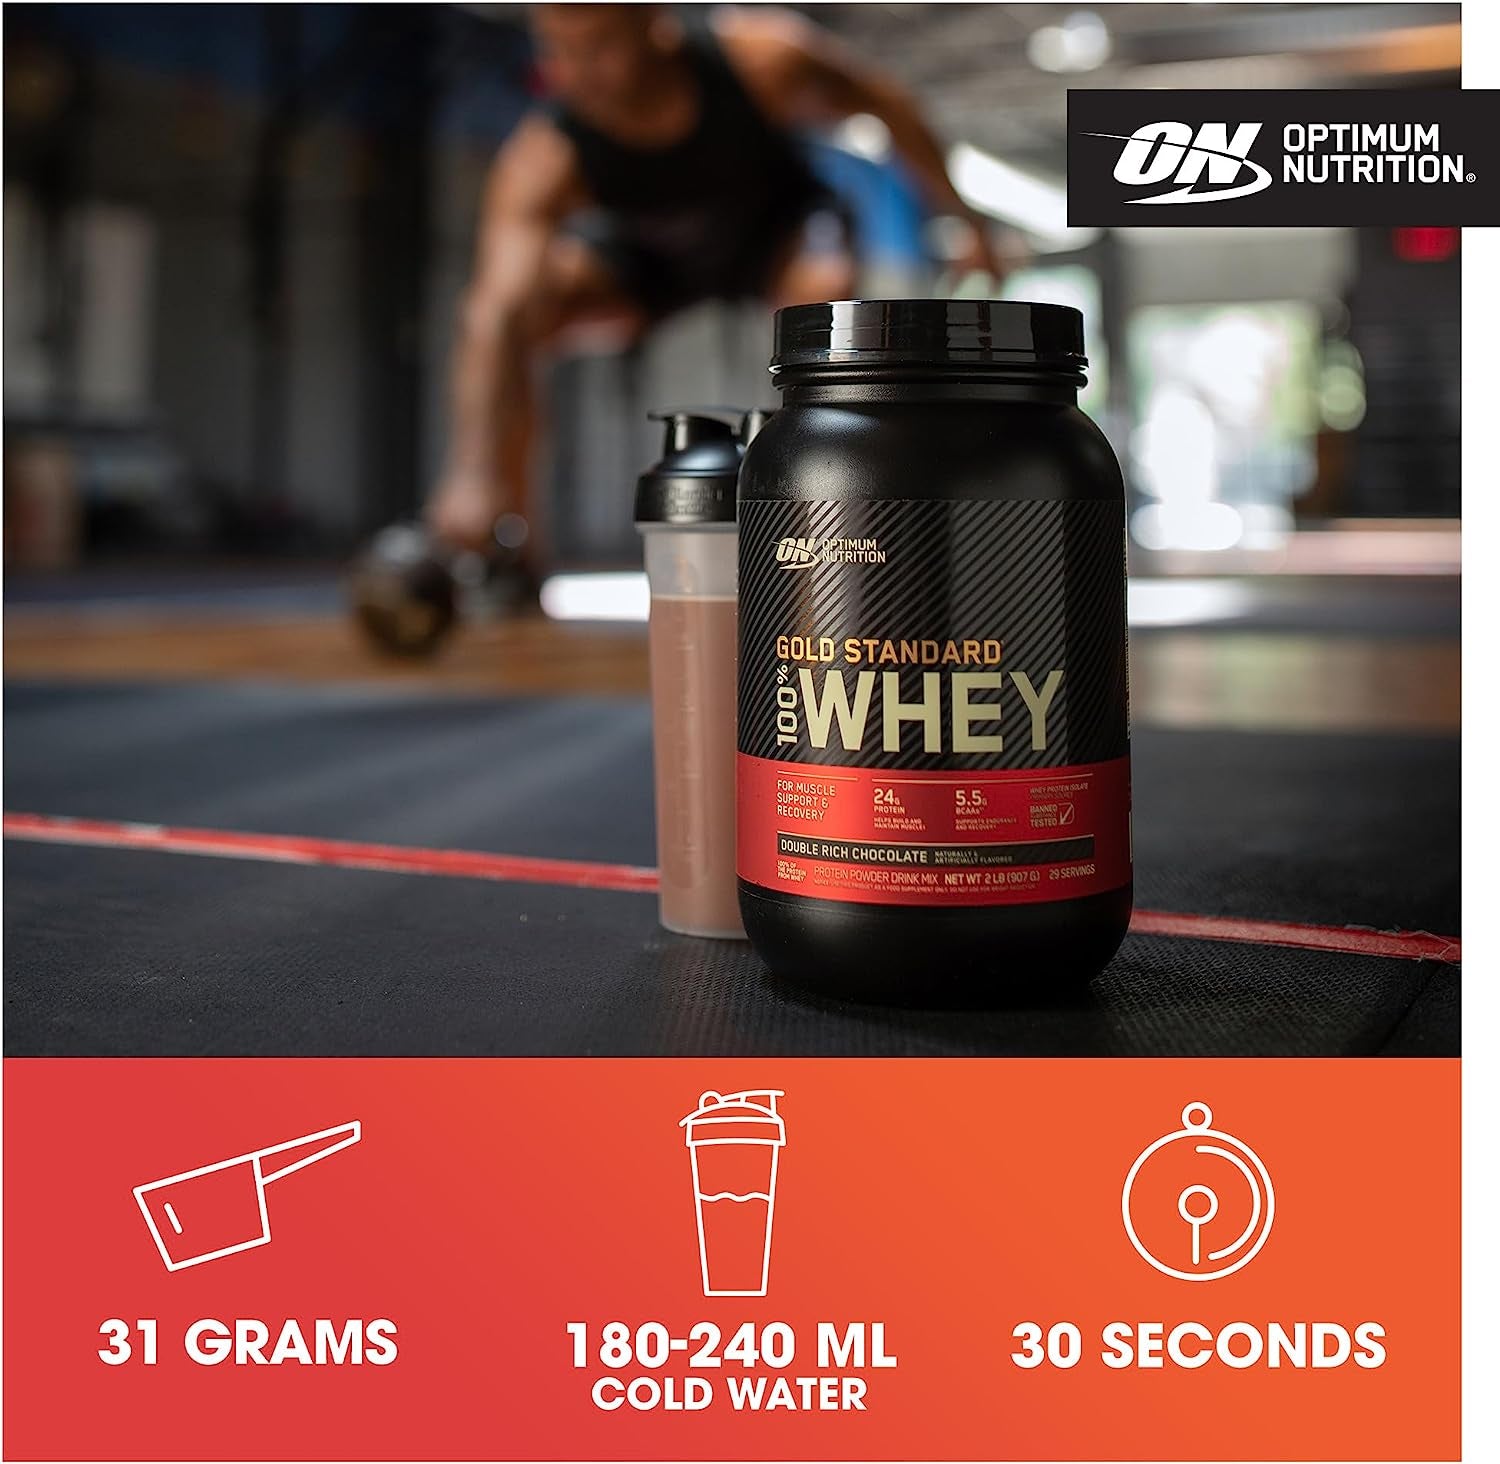 Gold Standard 100% Whey Muscle Building and Recovery Protein Powder with Naturally Occurring Glutamine and BCAA Amino Acids, Chocolate Hazelnut Flavour, 71 Servings, 2.27 Kg